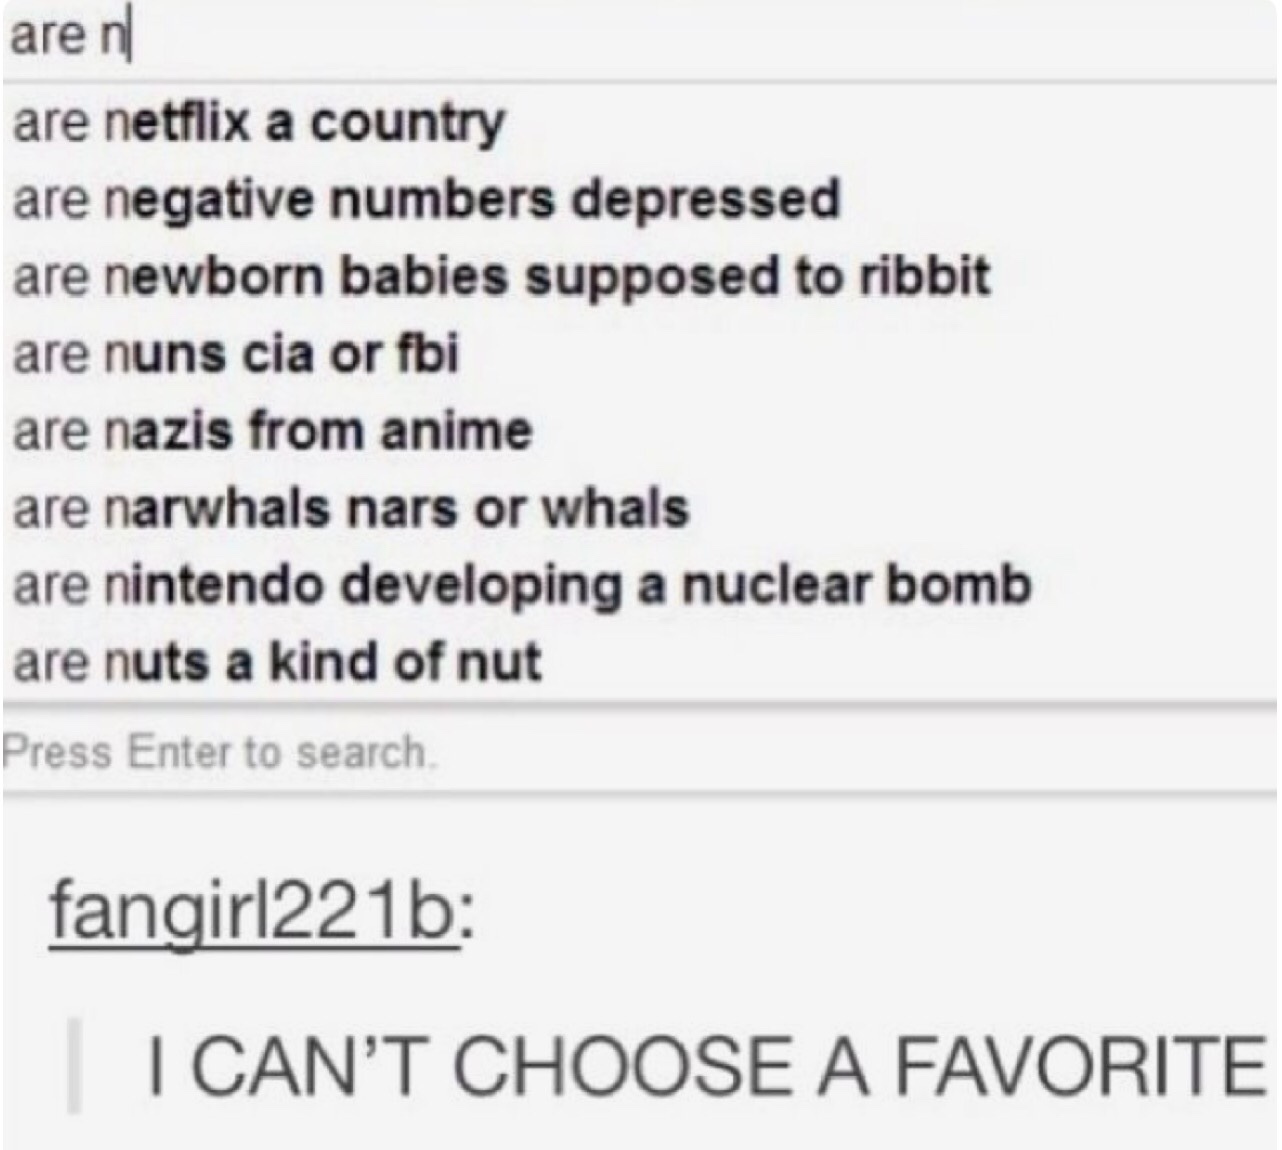 funny country posts - aren are netflix a country are negative numbers depressed are newborn babies supposed to ribbit are nuns cia or fbi are nazis from anime are narwhals nars or whals are nintendo developing a nuclear bomb are nuts a kind of nut Press E